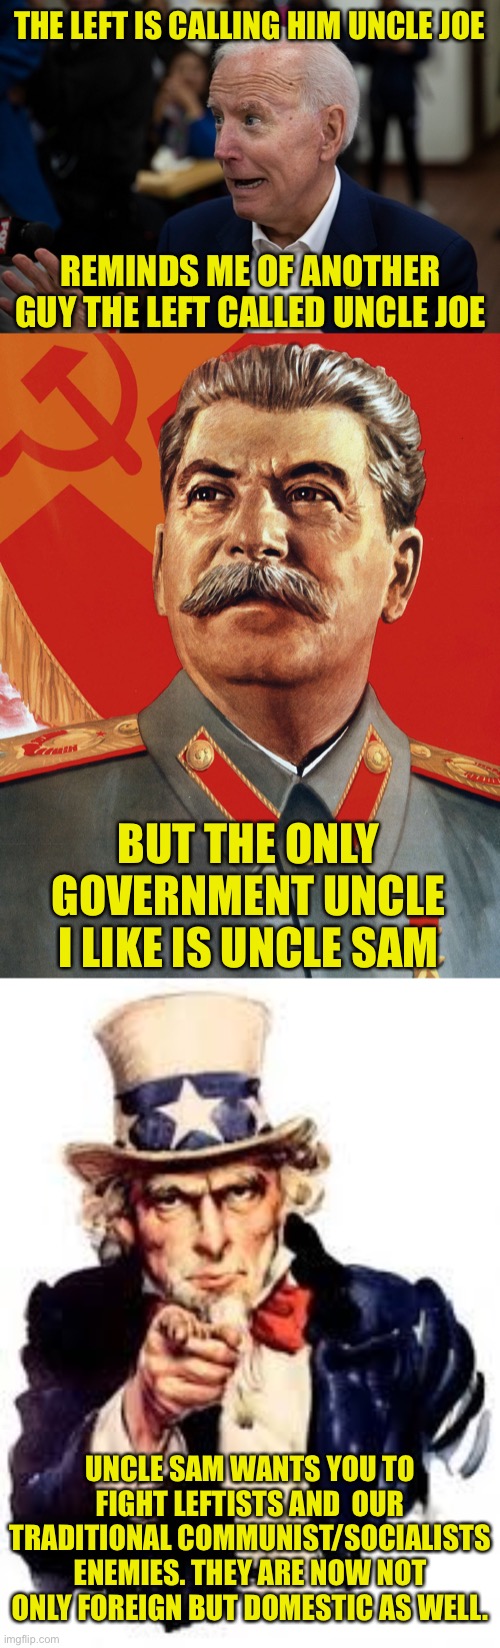 THE LEFT IS CALLING HIM UNCLE JOE; REMINDS ME OF ANOTHER GUY THE LEFT CALLED UNCLE JOE; BUT THE ONLY GOVERNMENT UNCLE I LIKE IS UNCLE SAM; UNCLE SAM WANTS YOU TO FIGHT LEFTISTS AND  OUR TRADITIONAL COMMUNIST/SOCIALISTS ENEMIES. THEY ARE NOW NOT ONLY FOREIGN BUT DOMESTIC AS WELL. | image tagged in old uncle joe,joseph stalin,usa needs you,leftists,democratic socialism | made w/ Imgflip meme maker